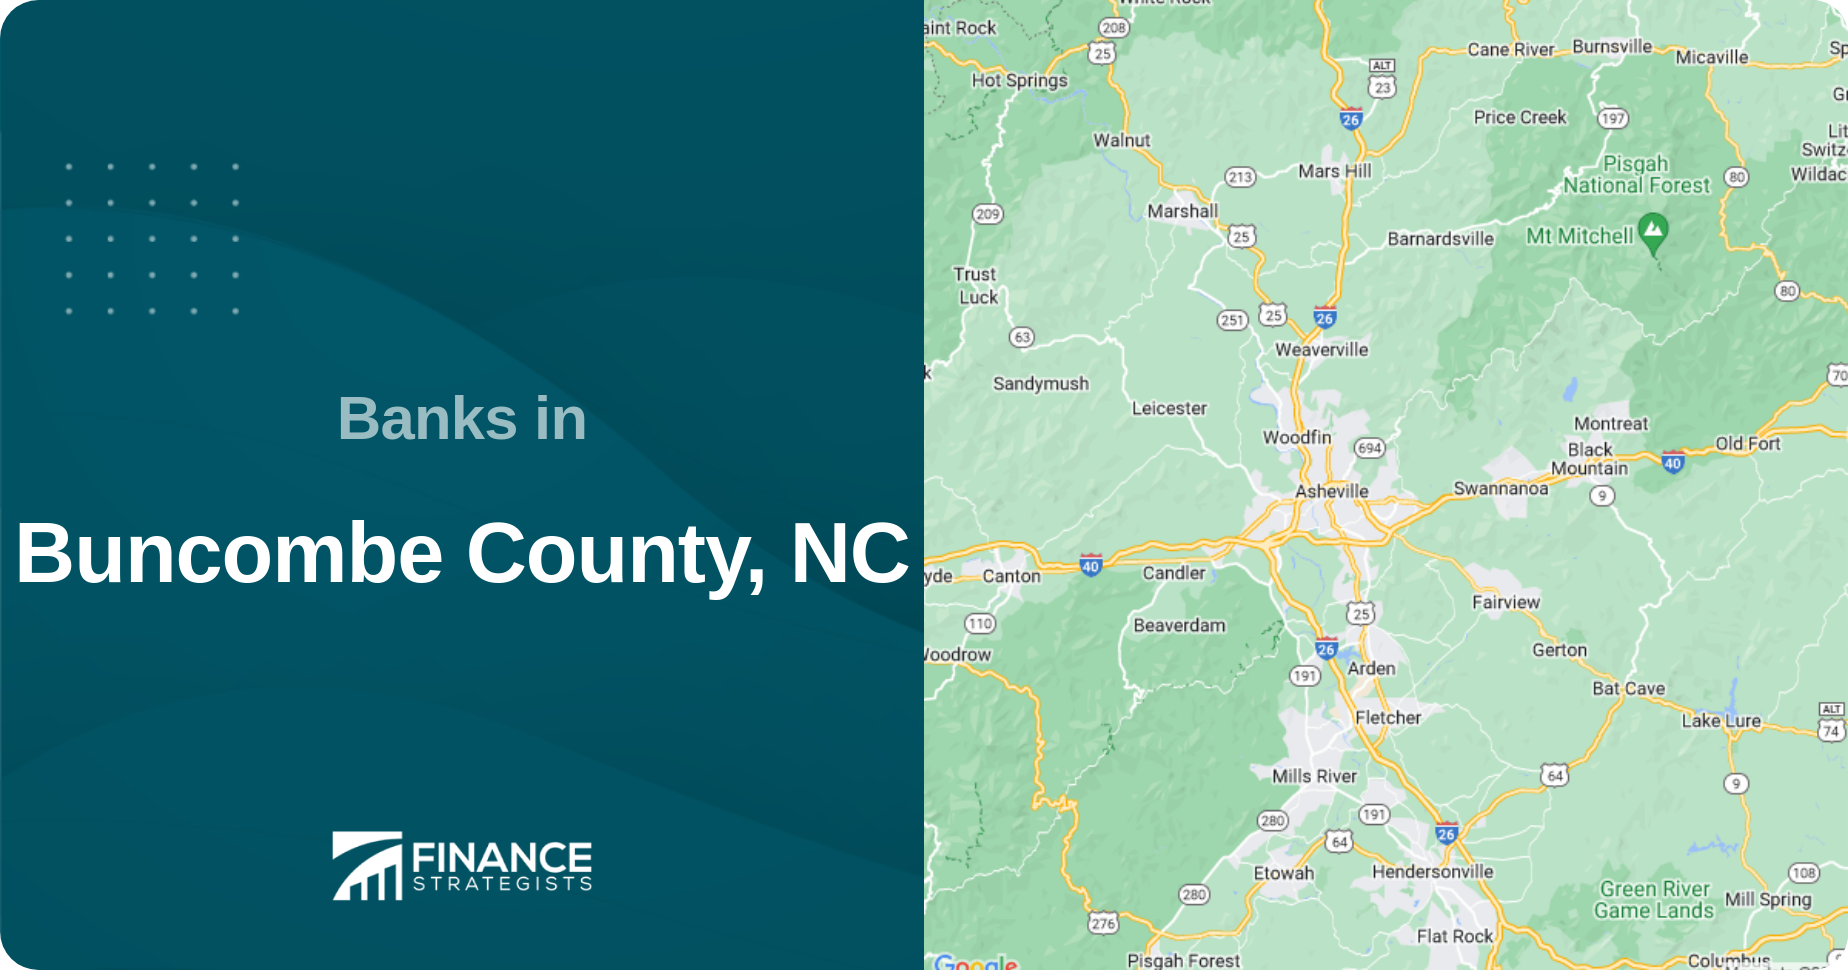 Banks in Buncombe County, NC